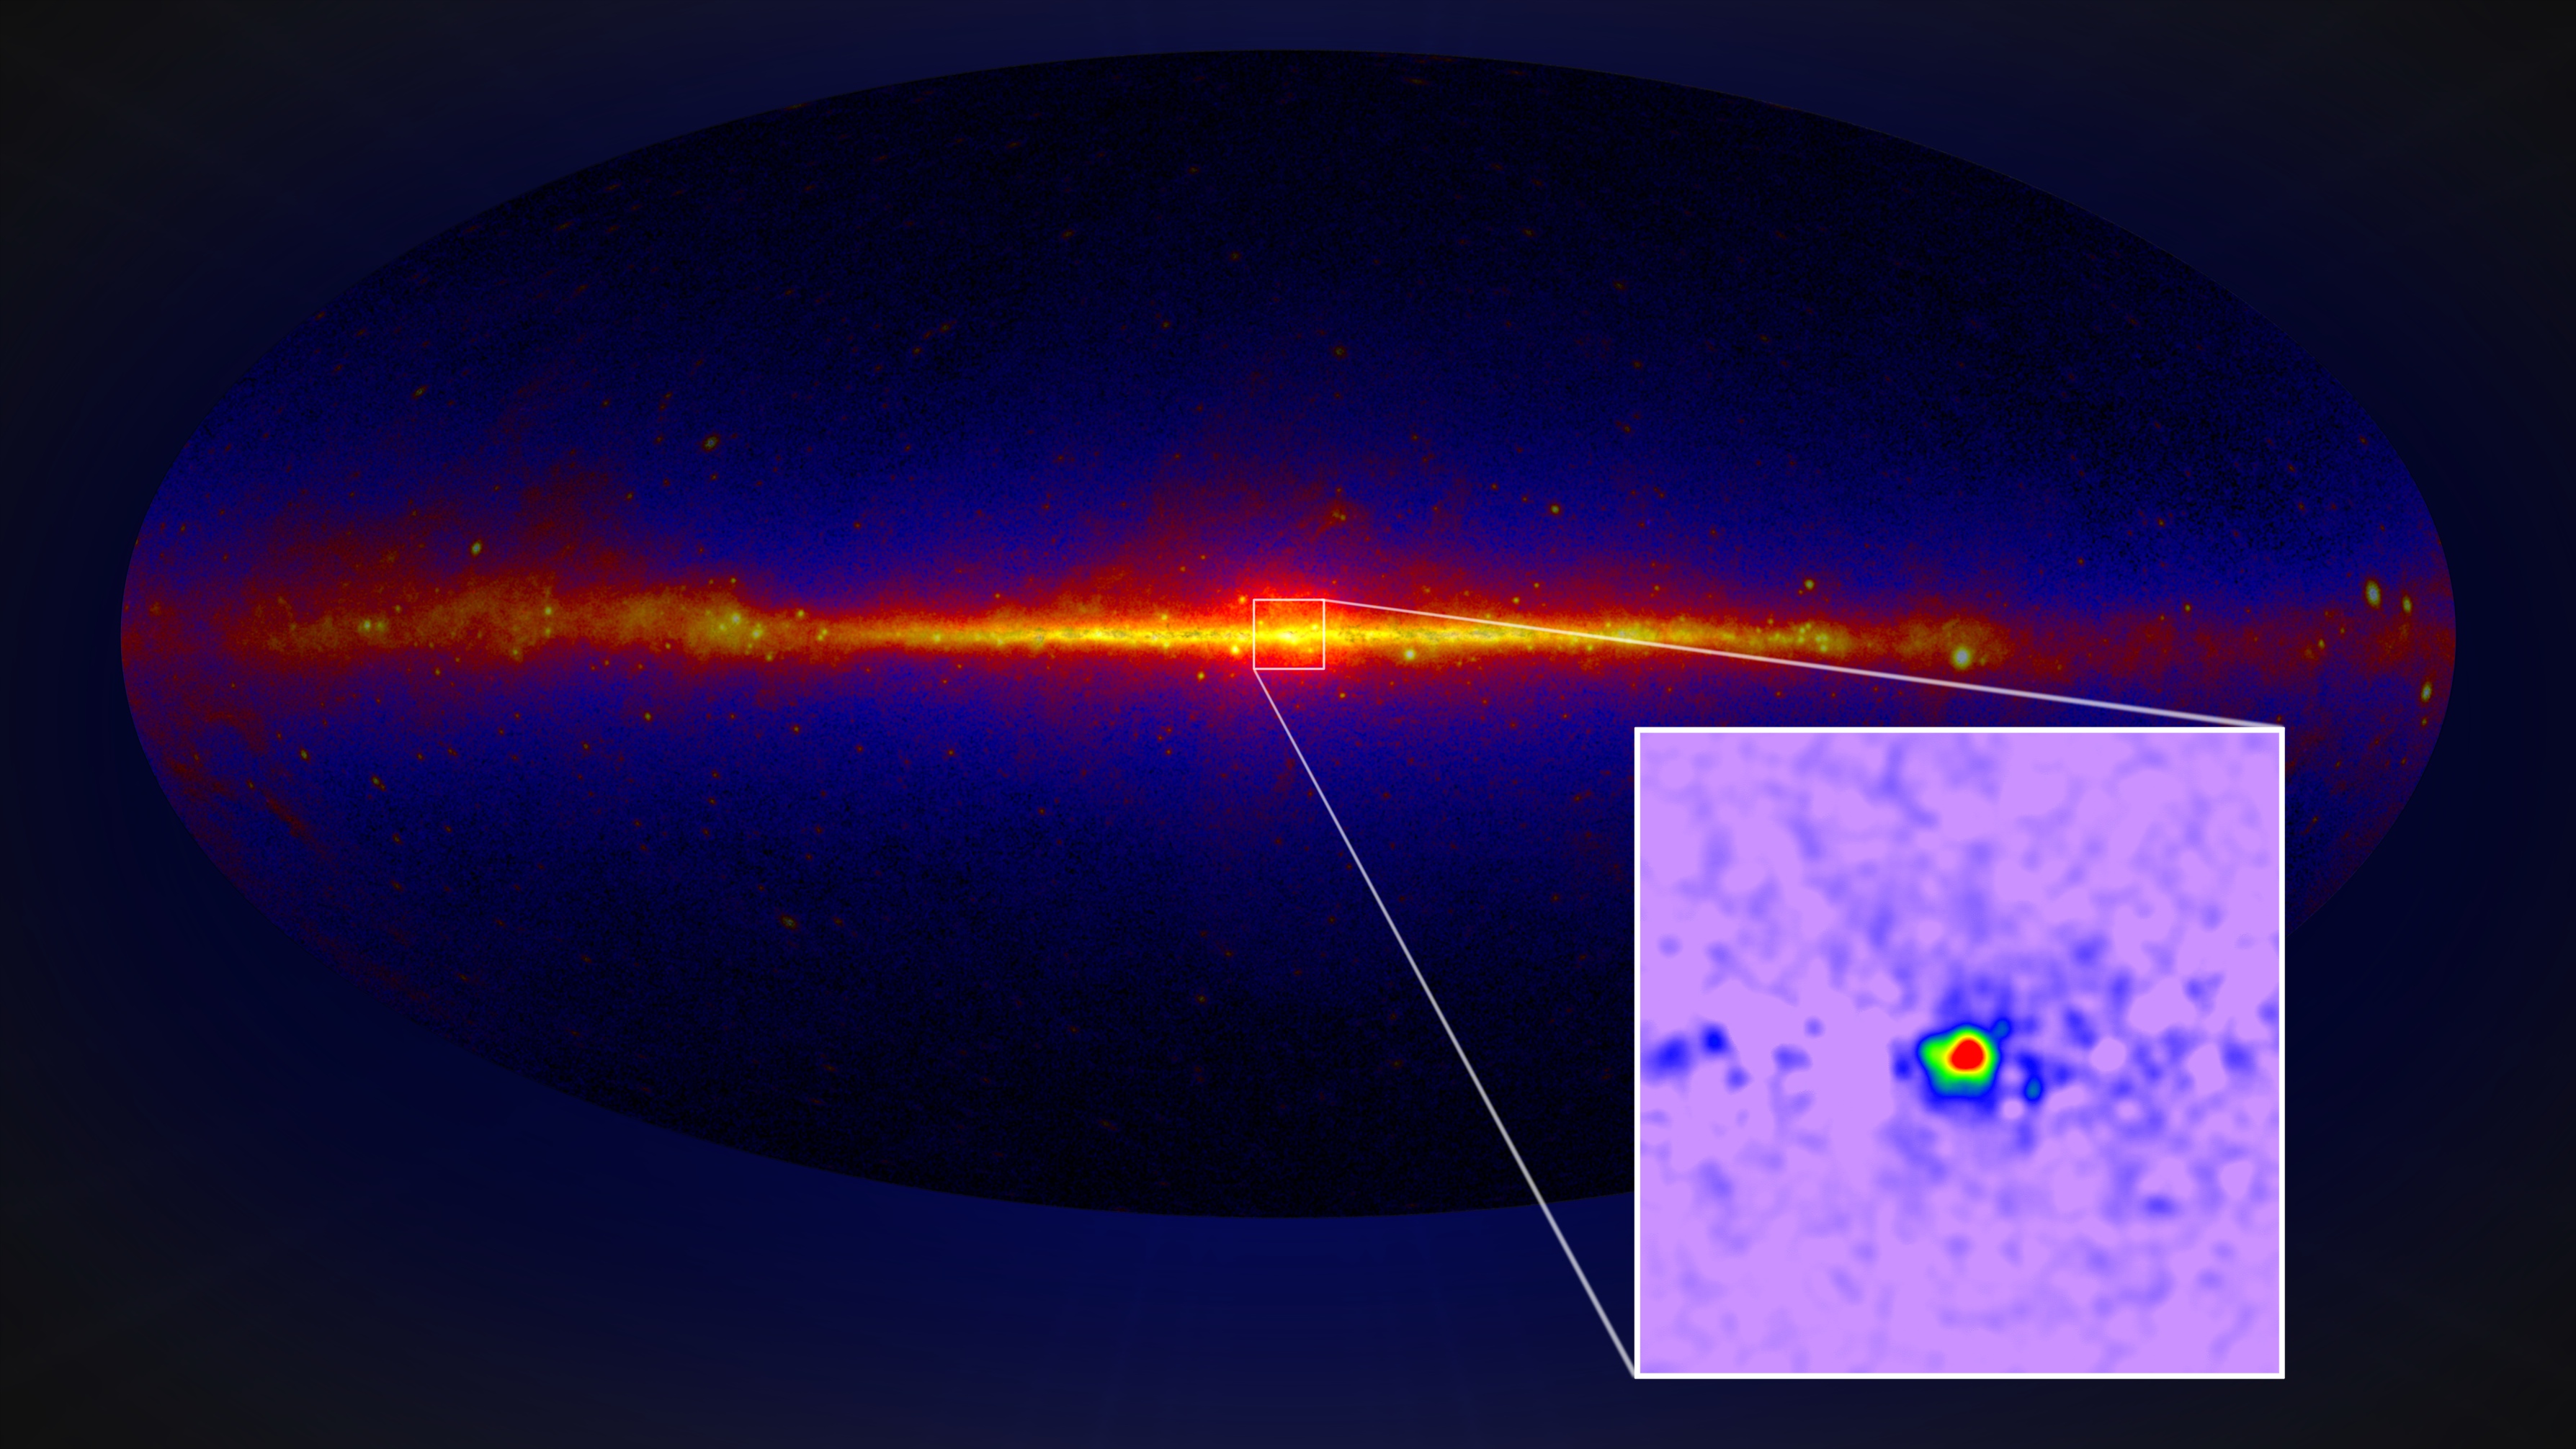 A view of the entire gamma-ray sky from Fermi's LAT instrument, shaded to emphasize the central galaxy.